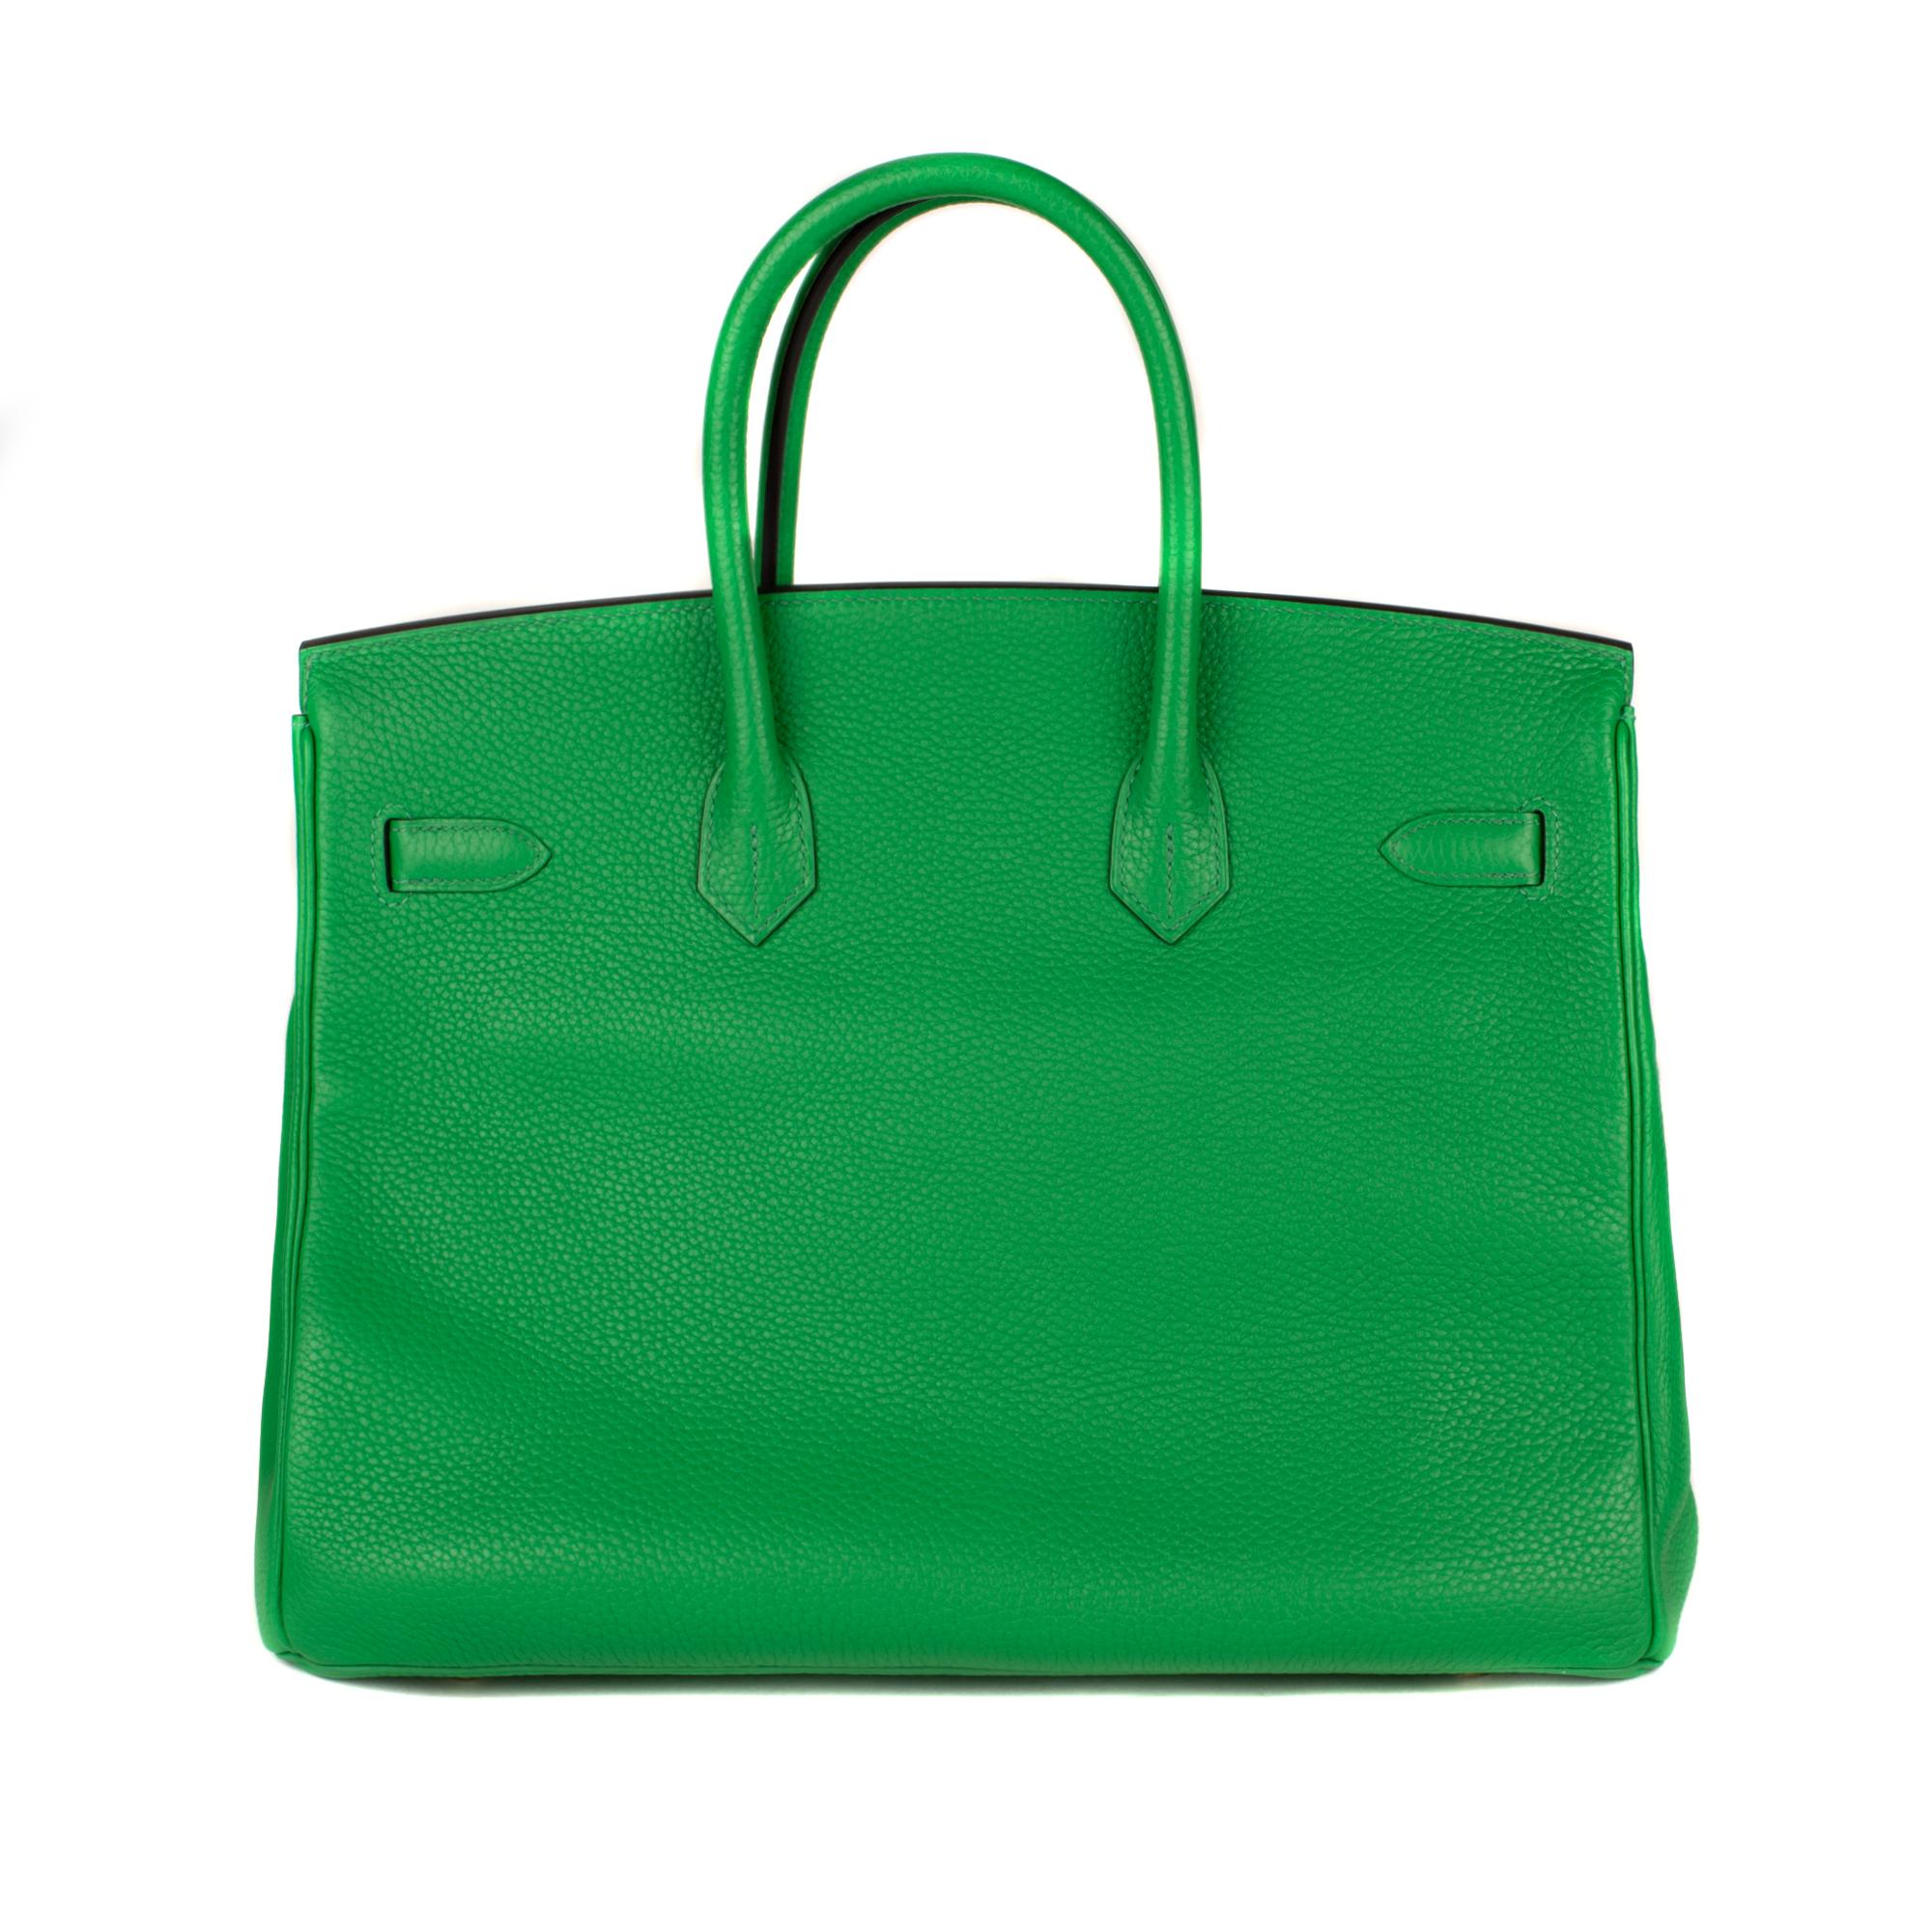 Brand: Hermès Type: Birkin 35
 Leather type: Togo 
Color: Bamboo green 
Description: Hermes Birkin handbag 35 cm in black togo leather, gold metal hardware, double black leather handle for a hand carried. Flap closure. Inner lining in green leather,